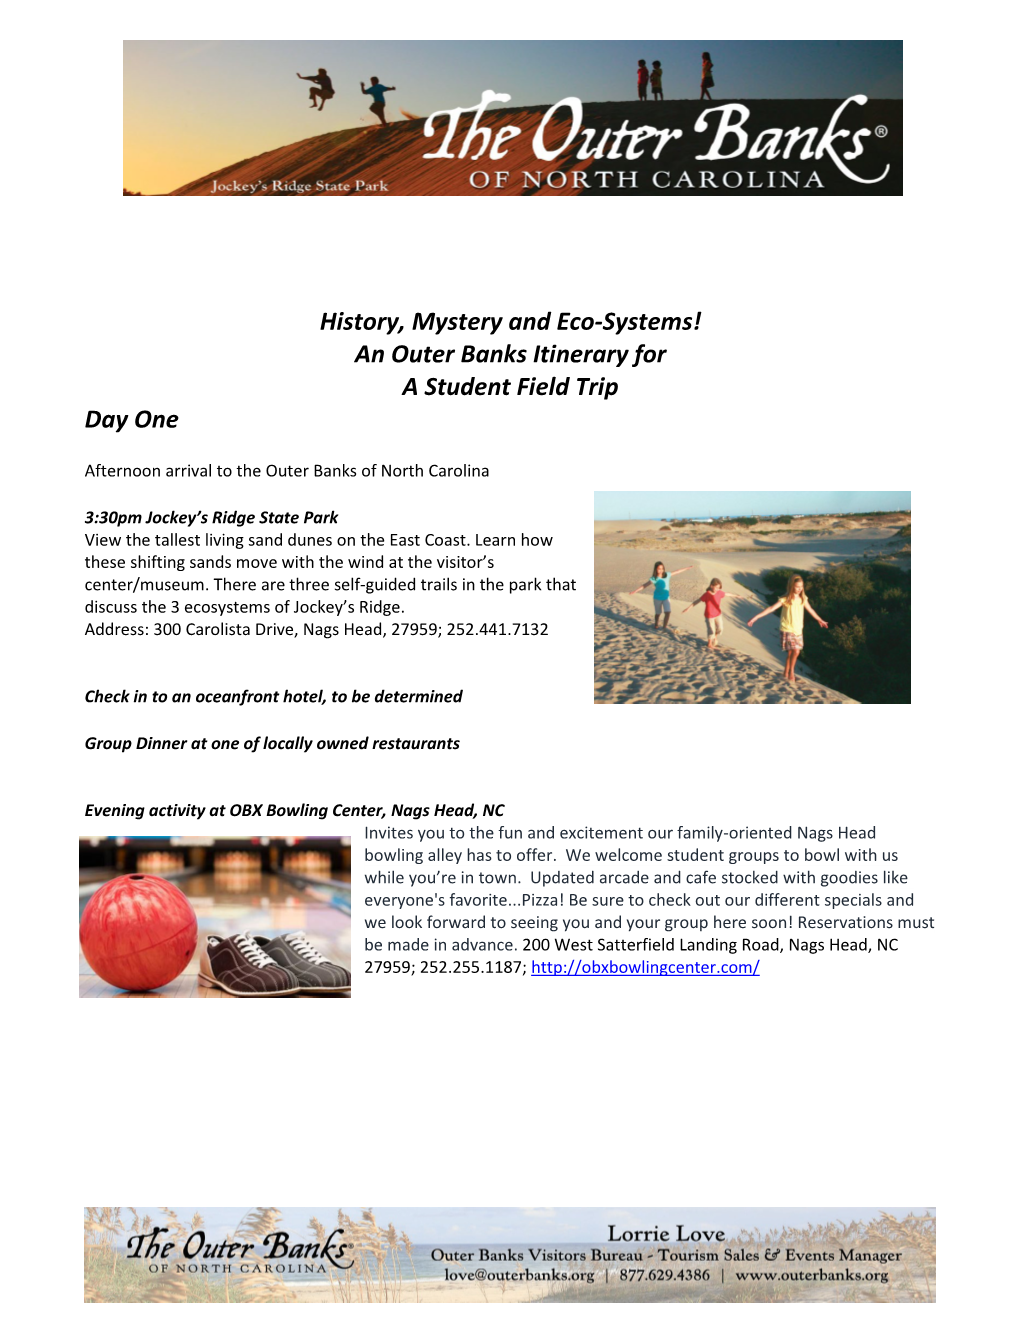 History, Mystery and Eco-Systems! an Outer Banks Itinerary for a Student Field Trip Day One